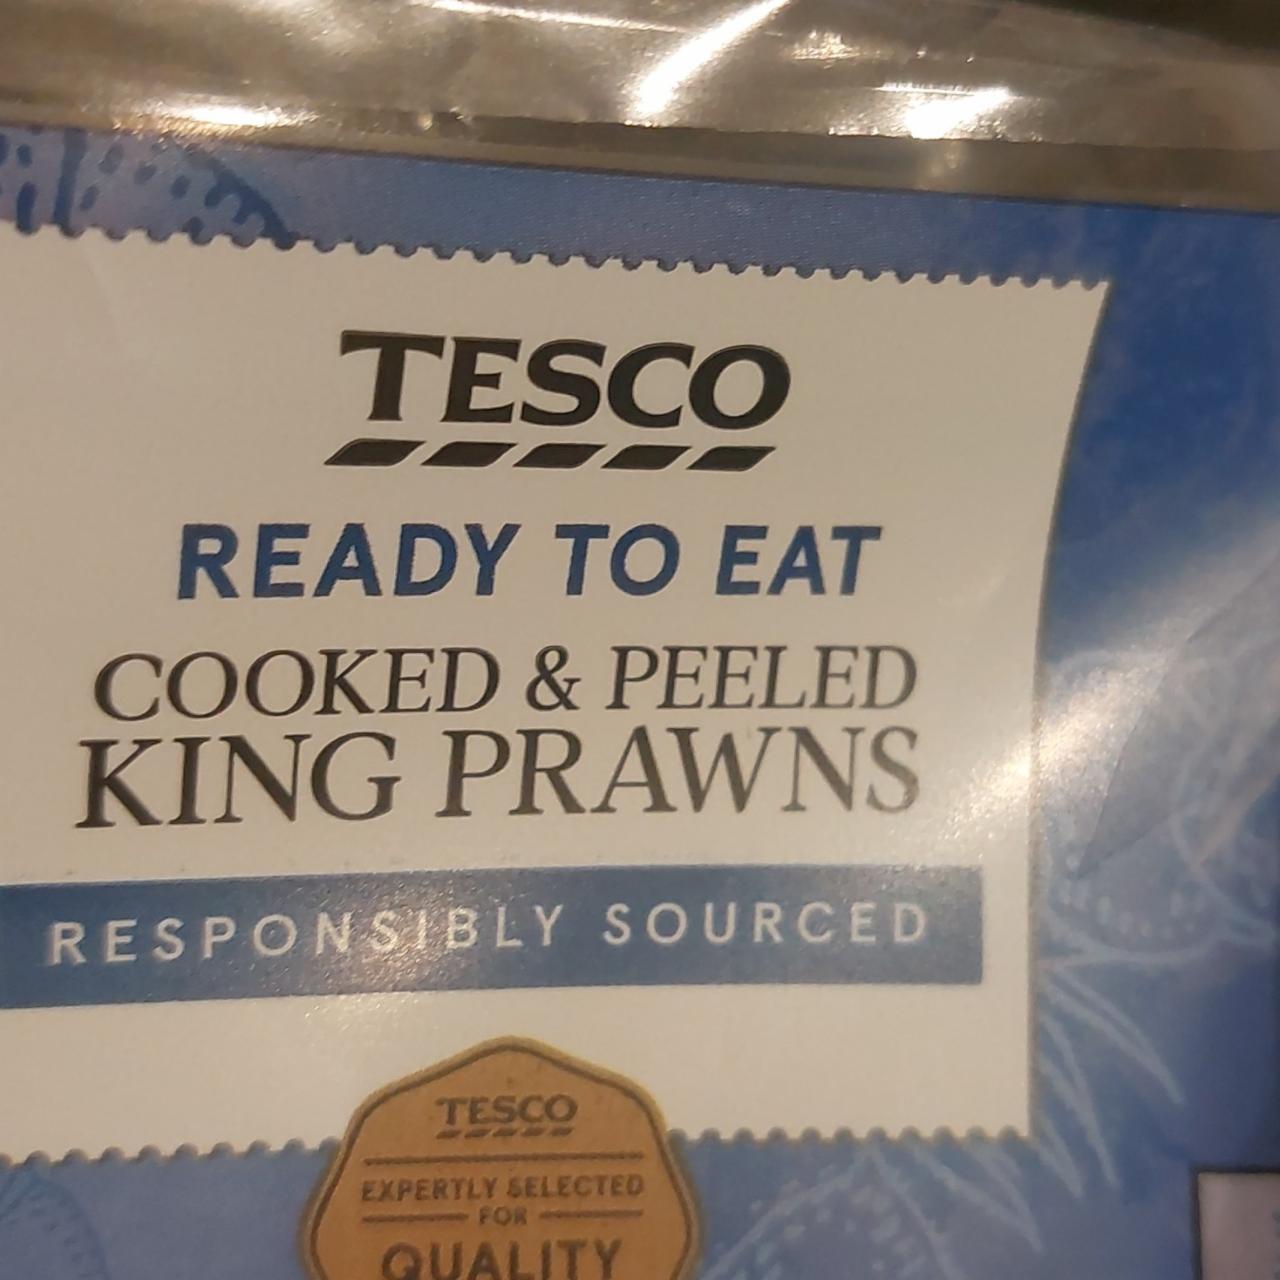 Fotografie - Ready to eat cooked & peeled king prawns responsibly sourced Tesco